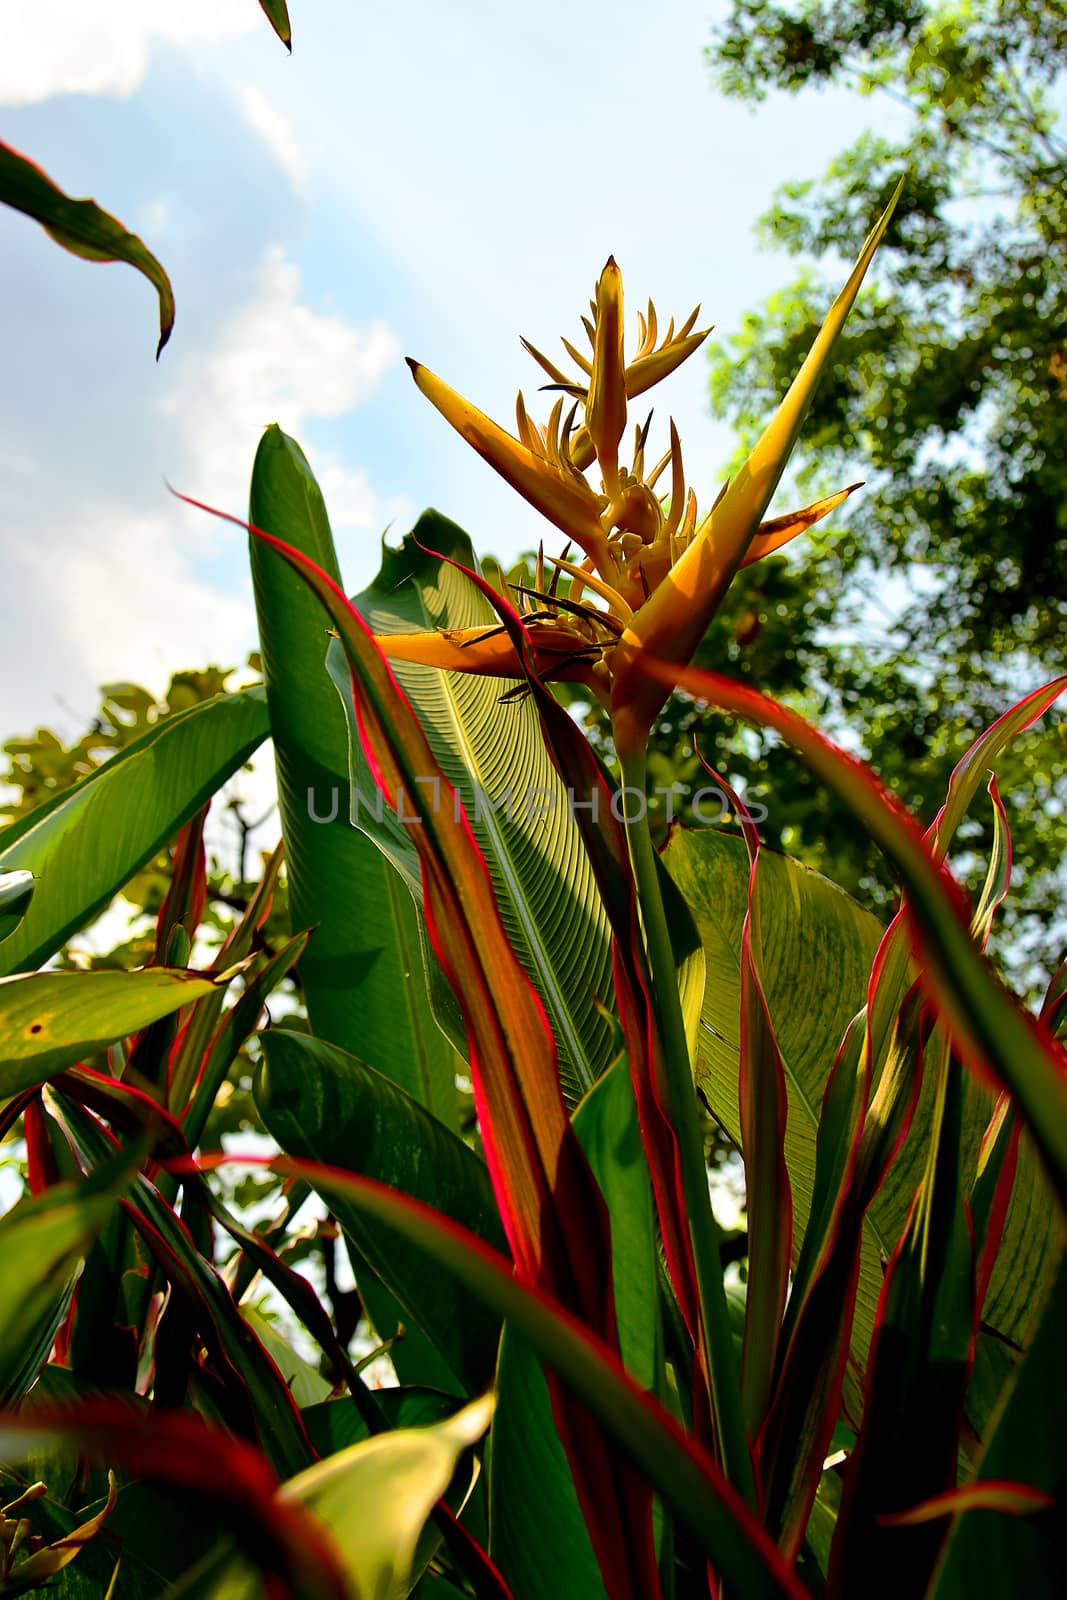 Under view of Yellow Heliconia Torch Flowers